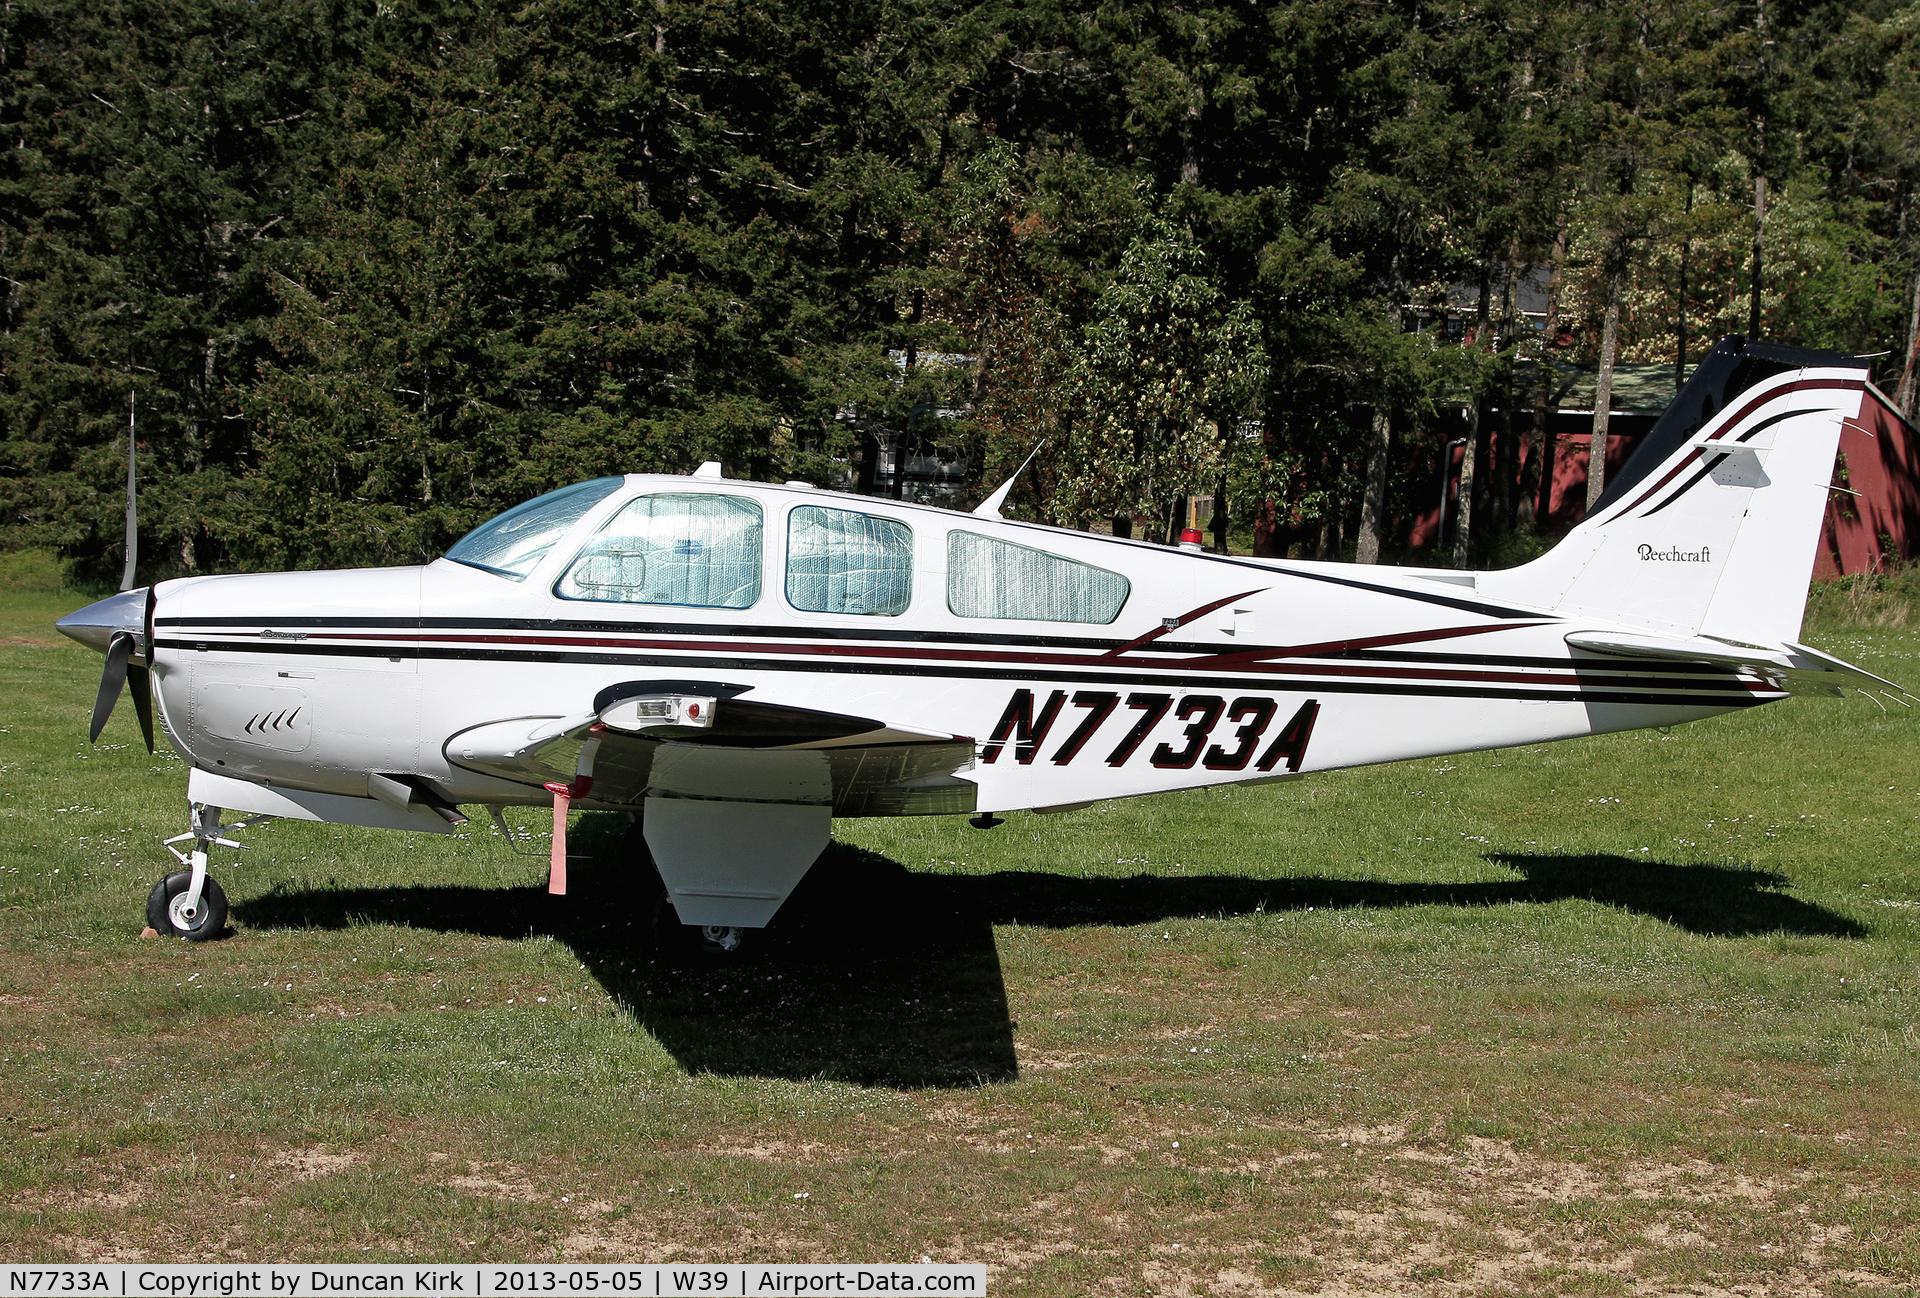 N7733A, 1988 Beech F33A Bonanza C/N CE-1261, Parked on the slope at Roche Harbor